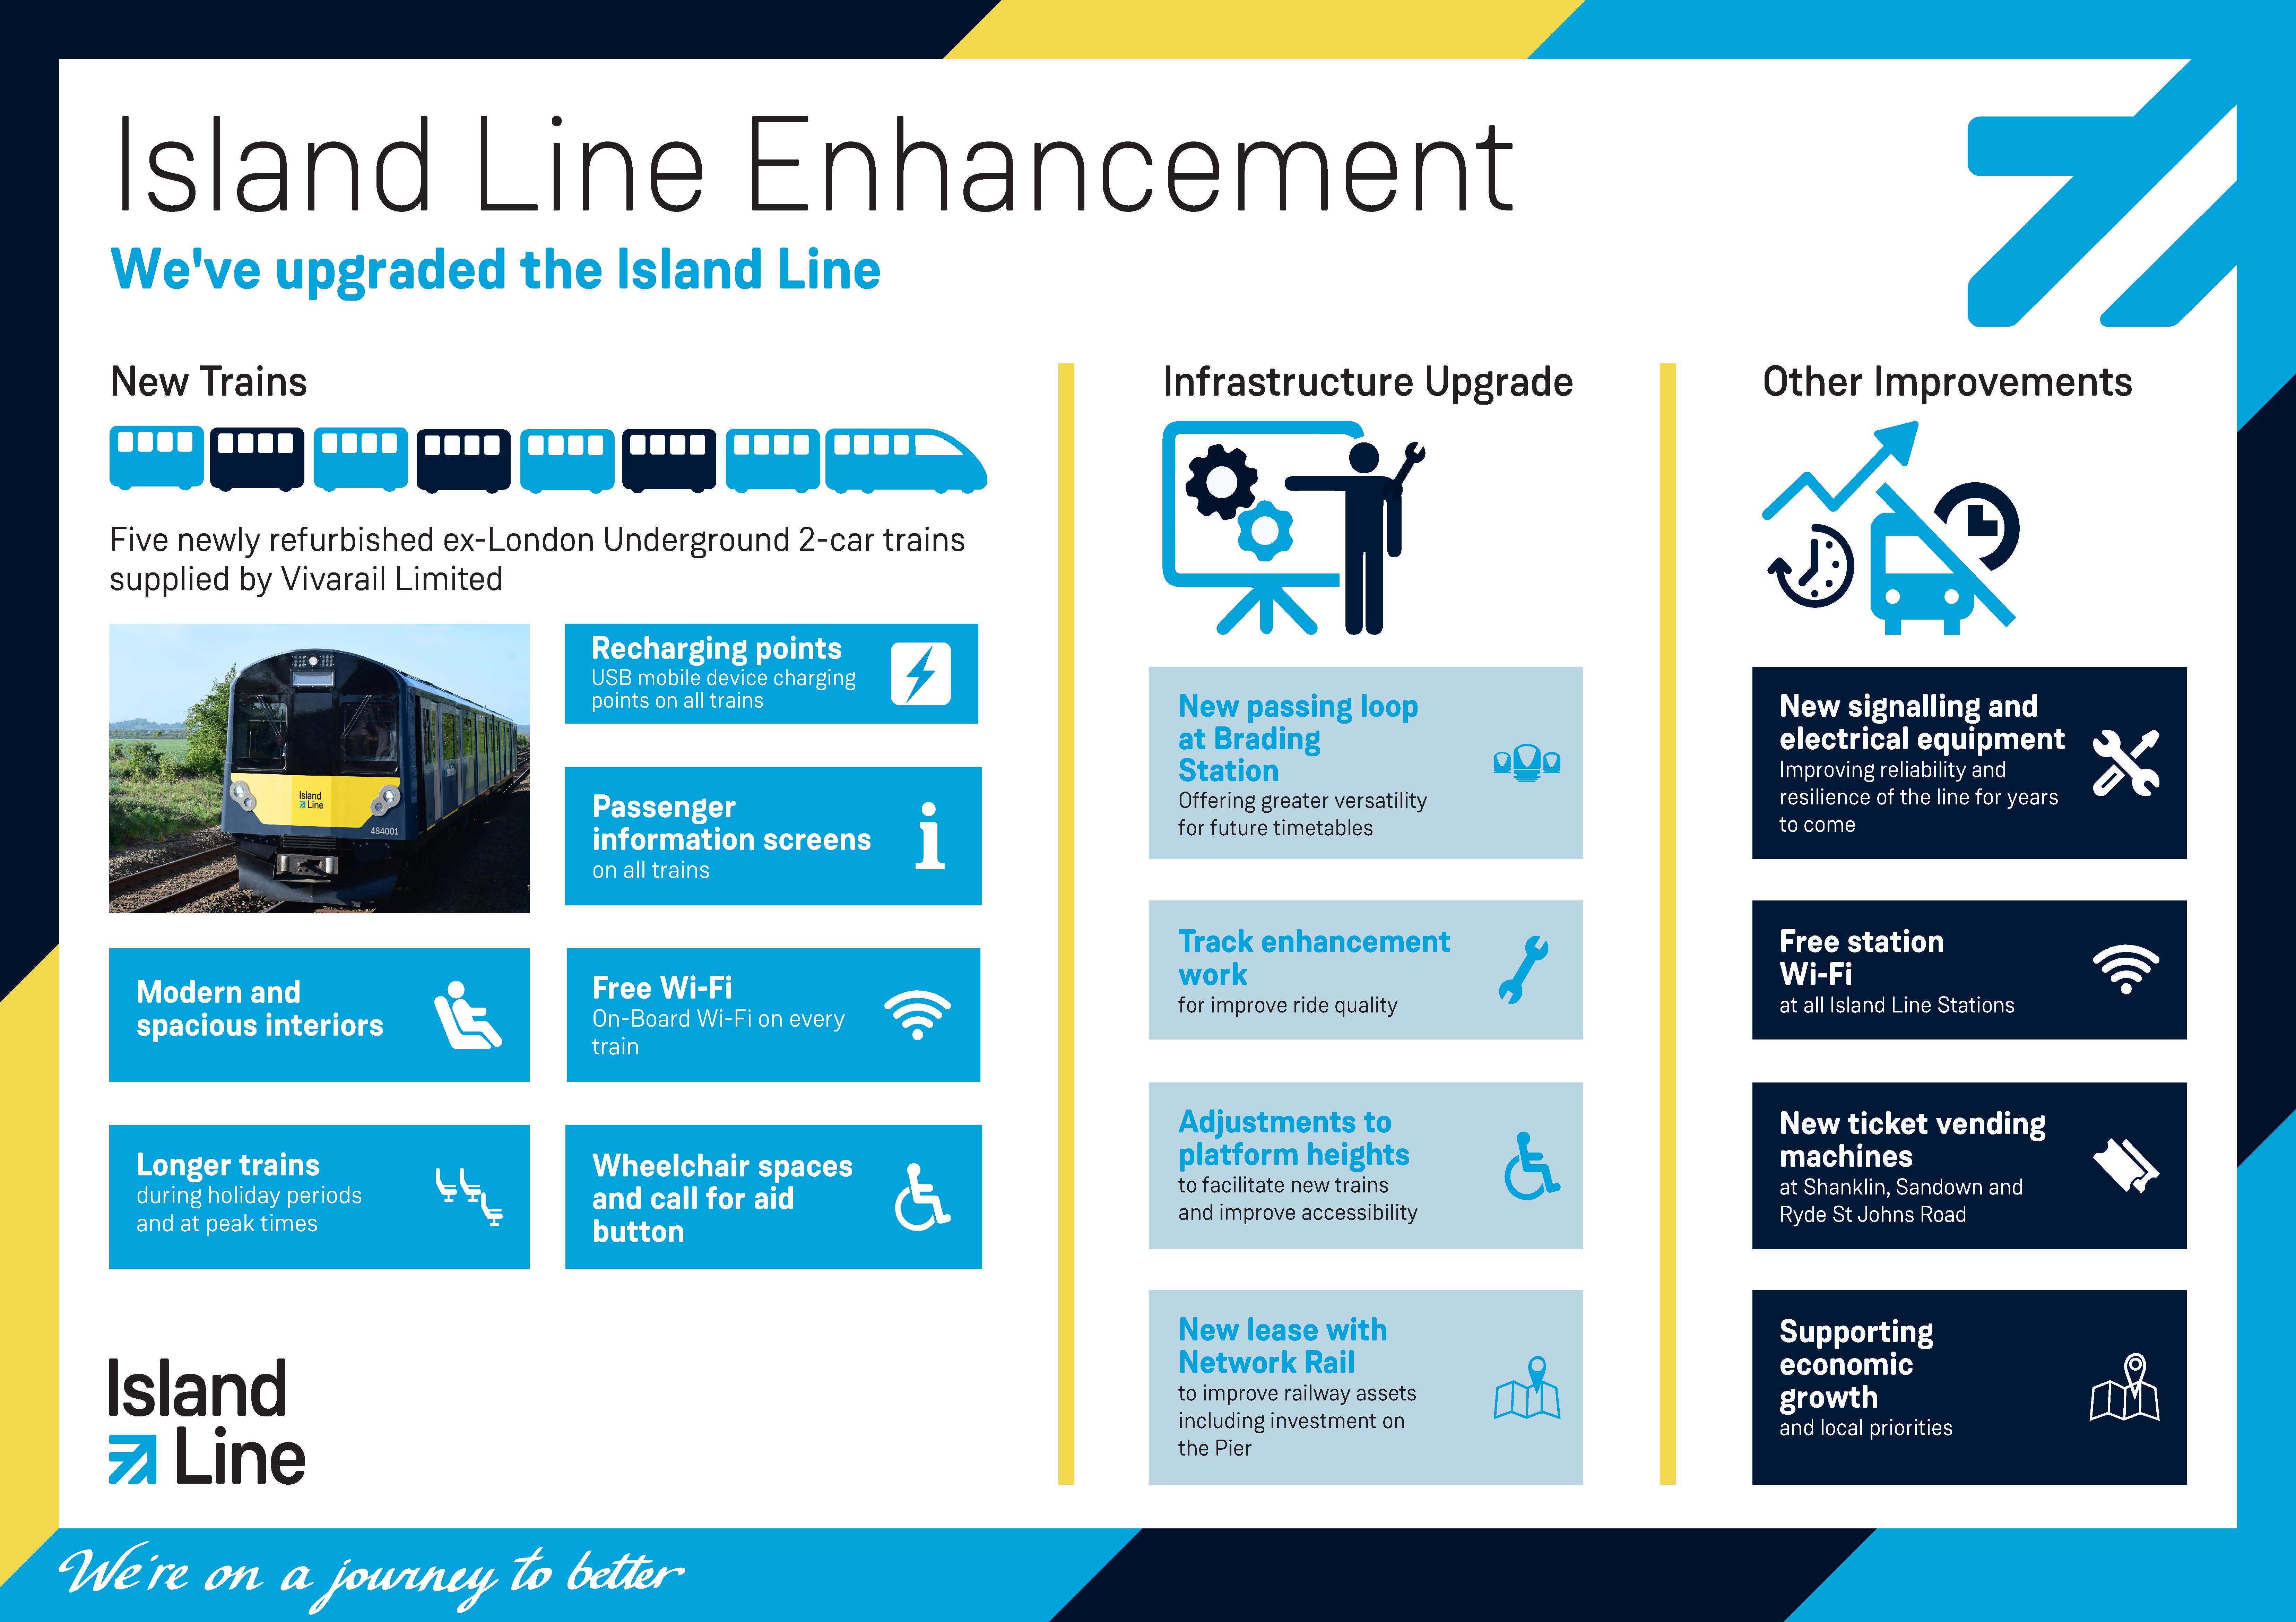 Infographic containing information about the Island Line upgrade